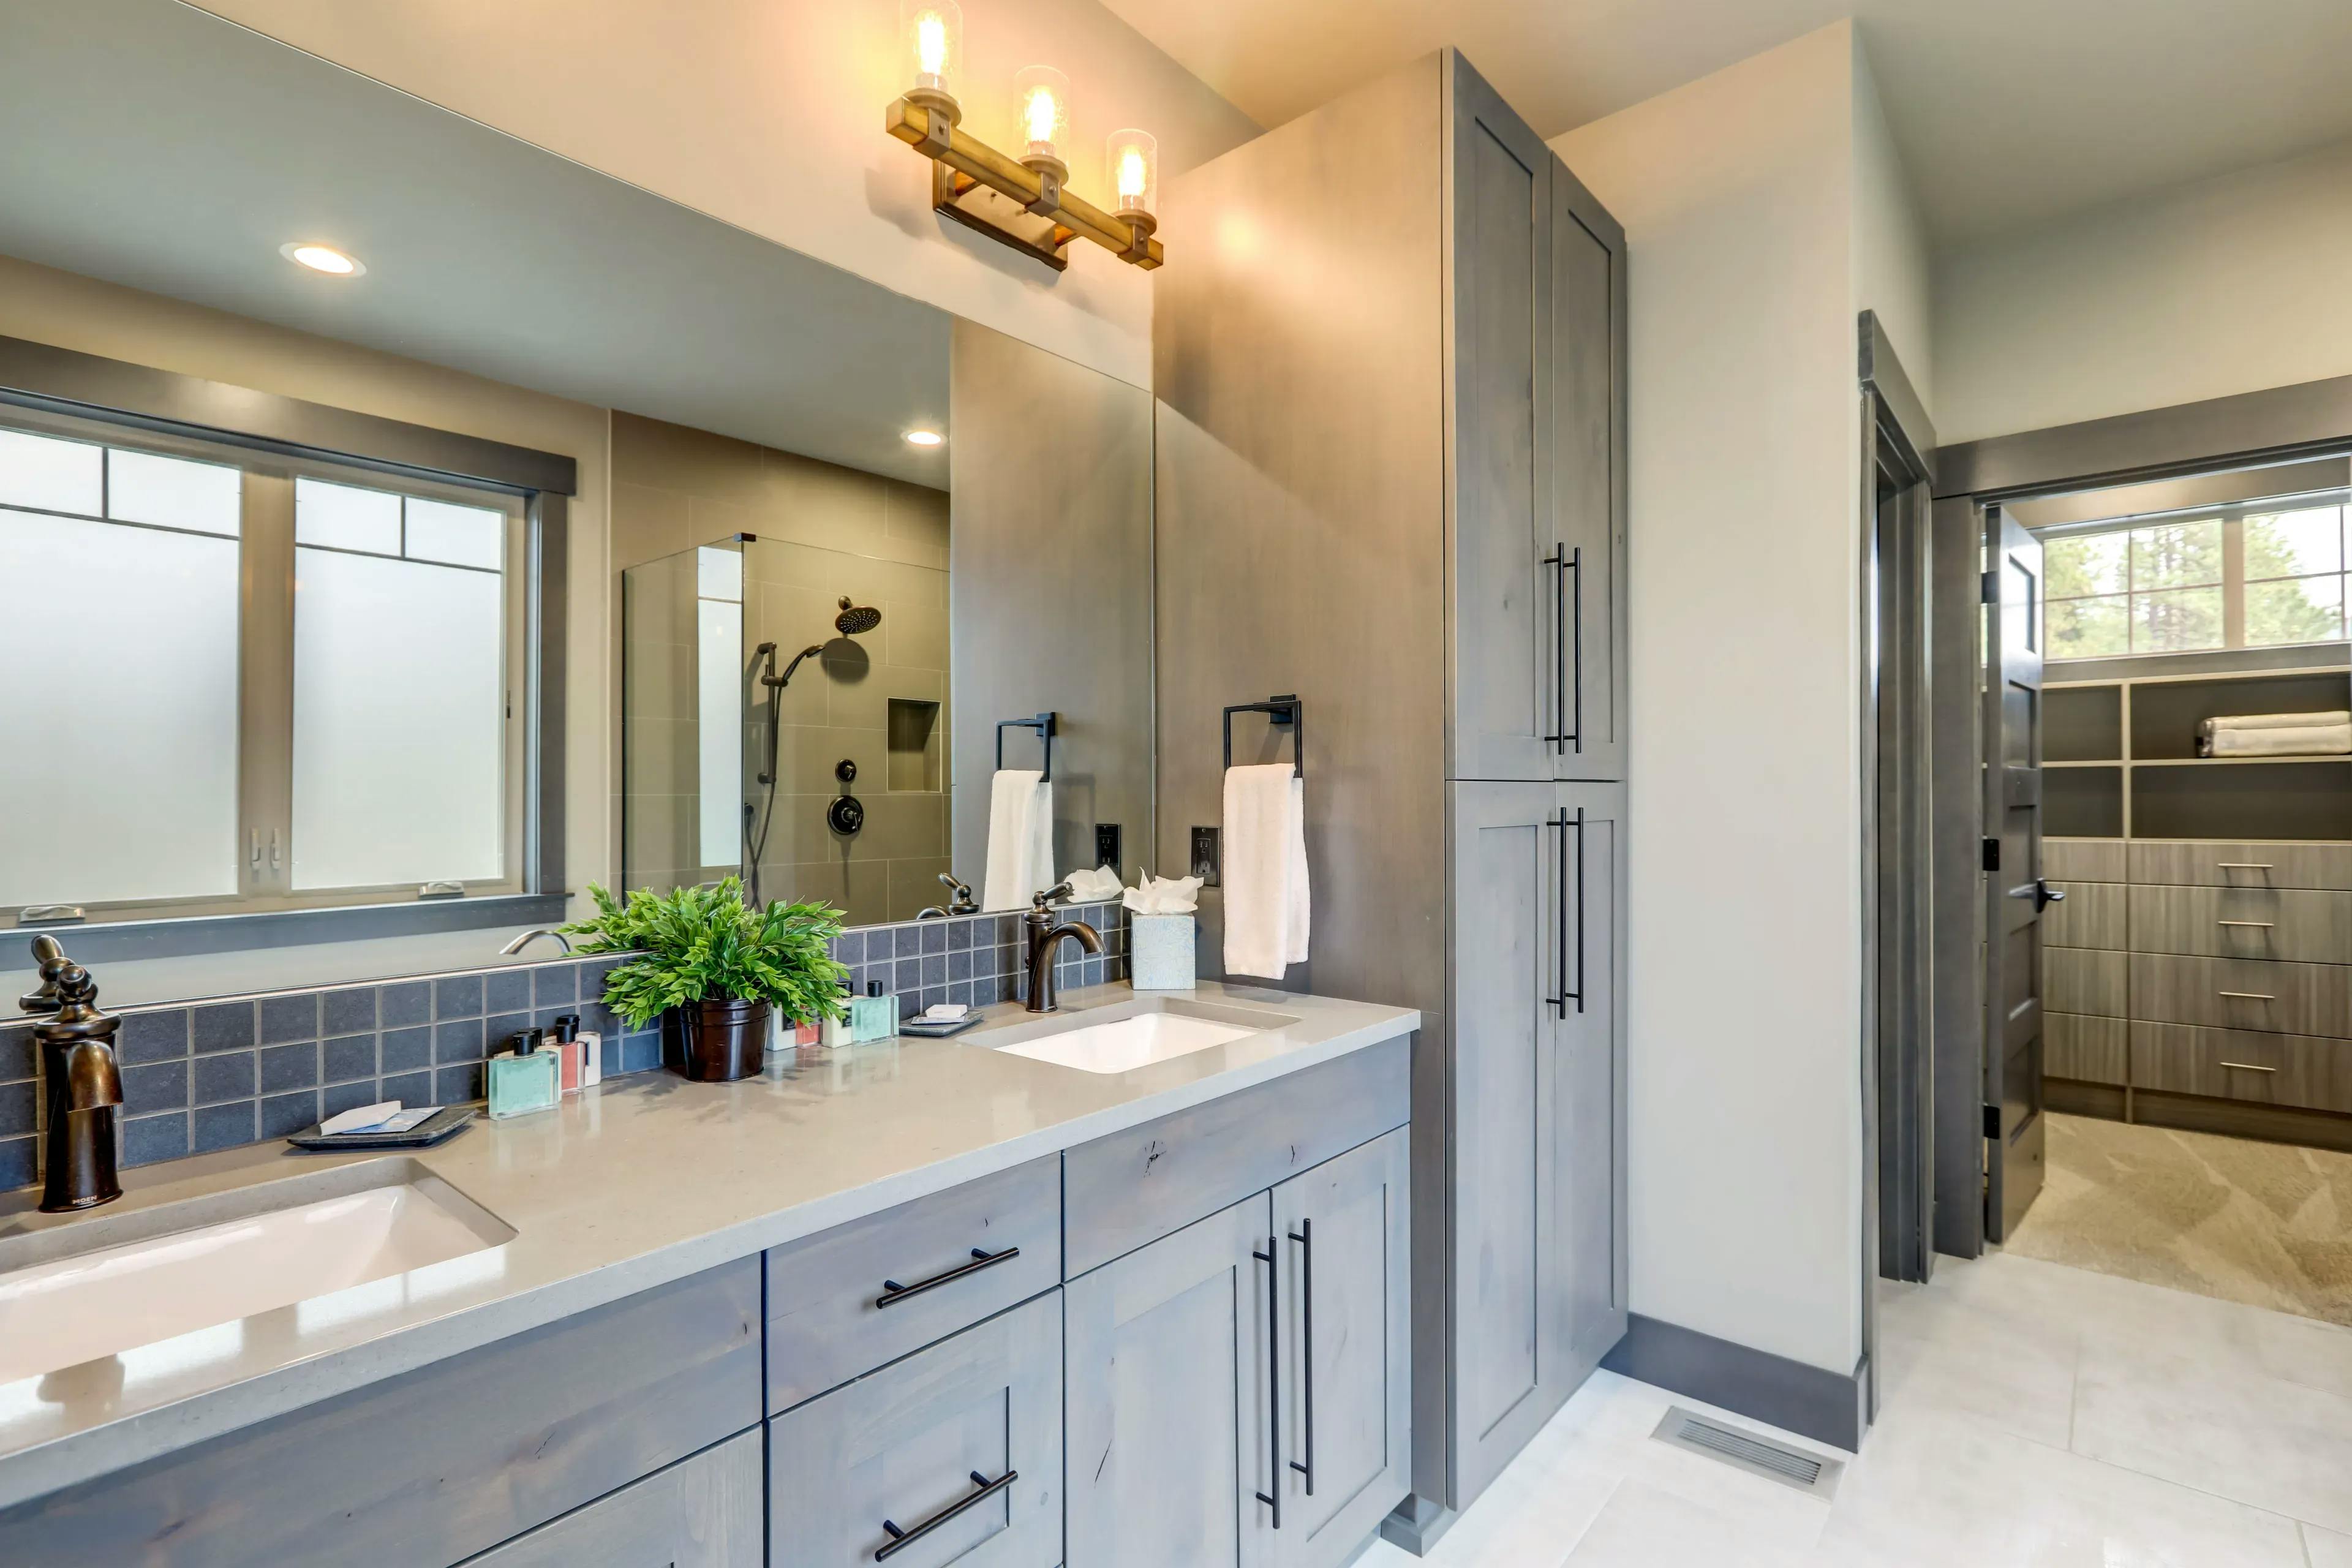 Bathroom setting with a large rectangular mirror over the sink, cabinets to one side, and a glass shower door in the background